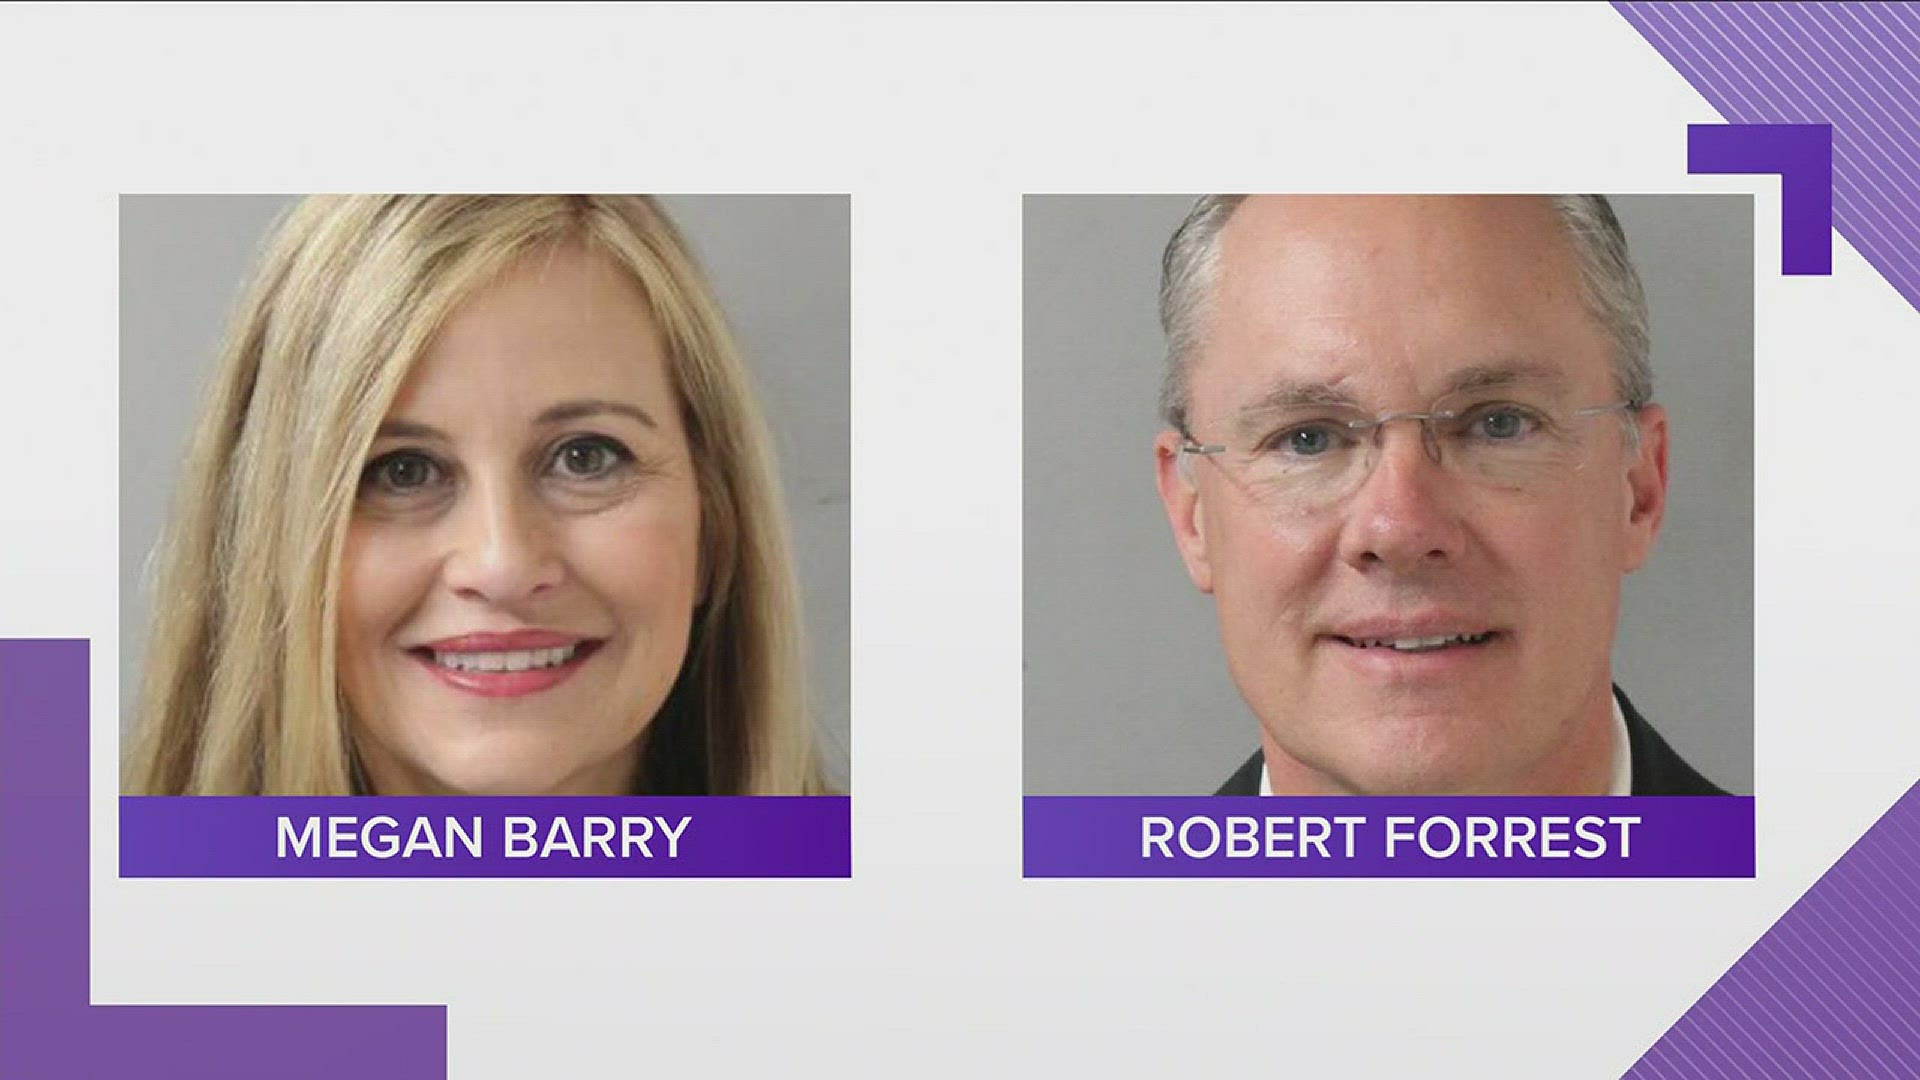 The announcement comes after weeks of controversy surrounding the Megan Barry, who was at the center of an investigation regarding an affair with her former bodyguard.